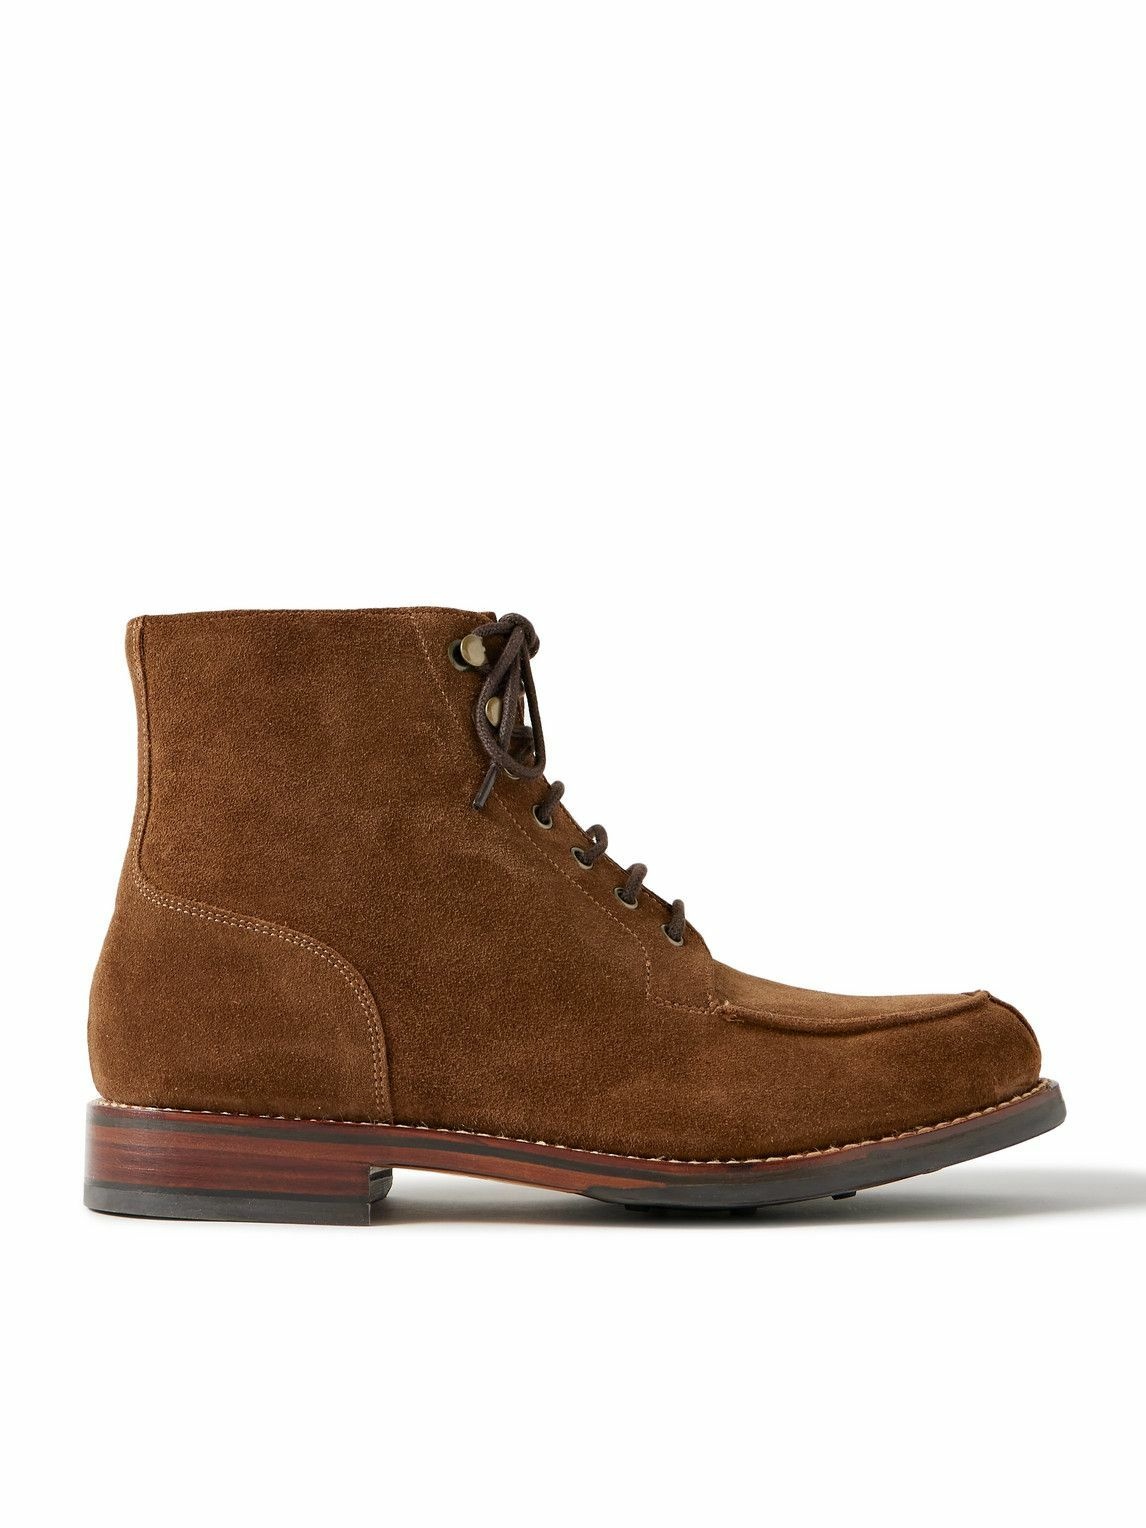 Photo: Grenson - Donald Suede Boots - Brown